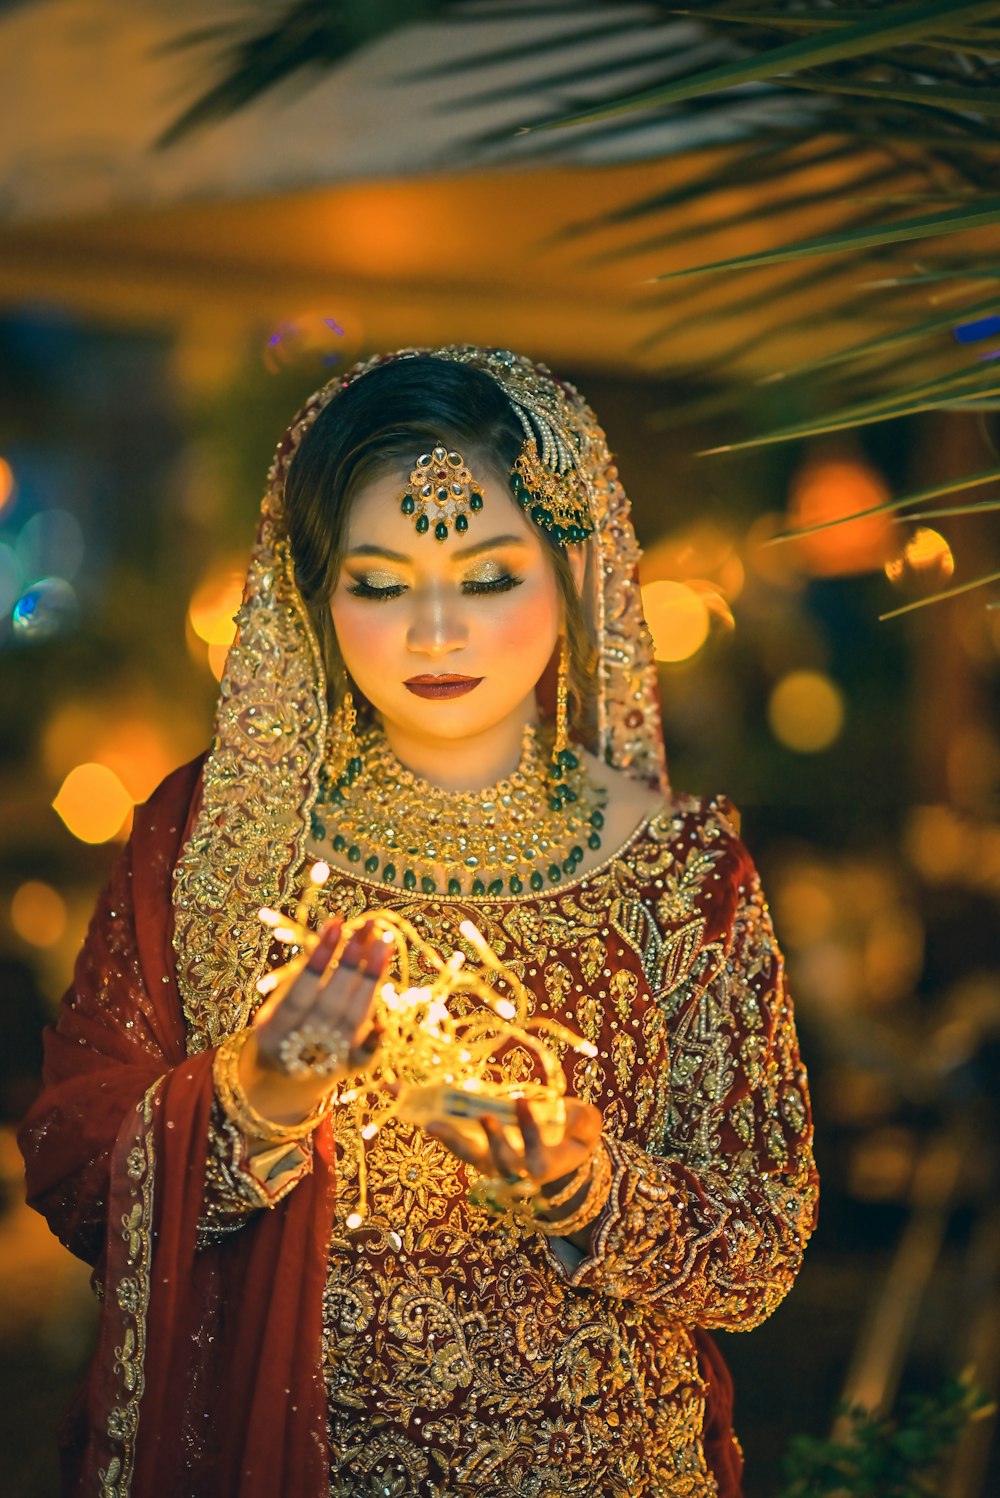 a woman dressed in traditional indian garb holding a lit candle